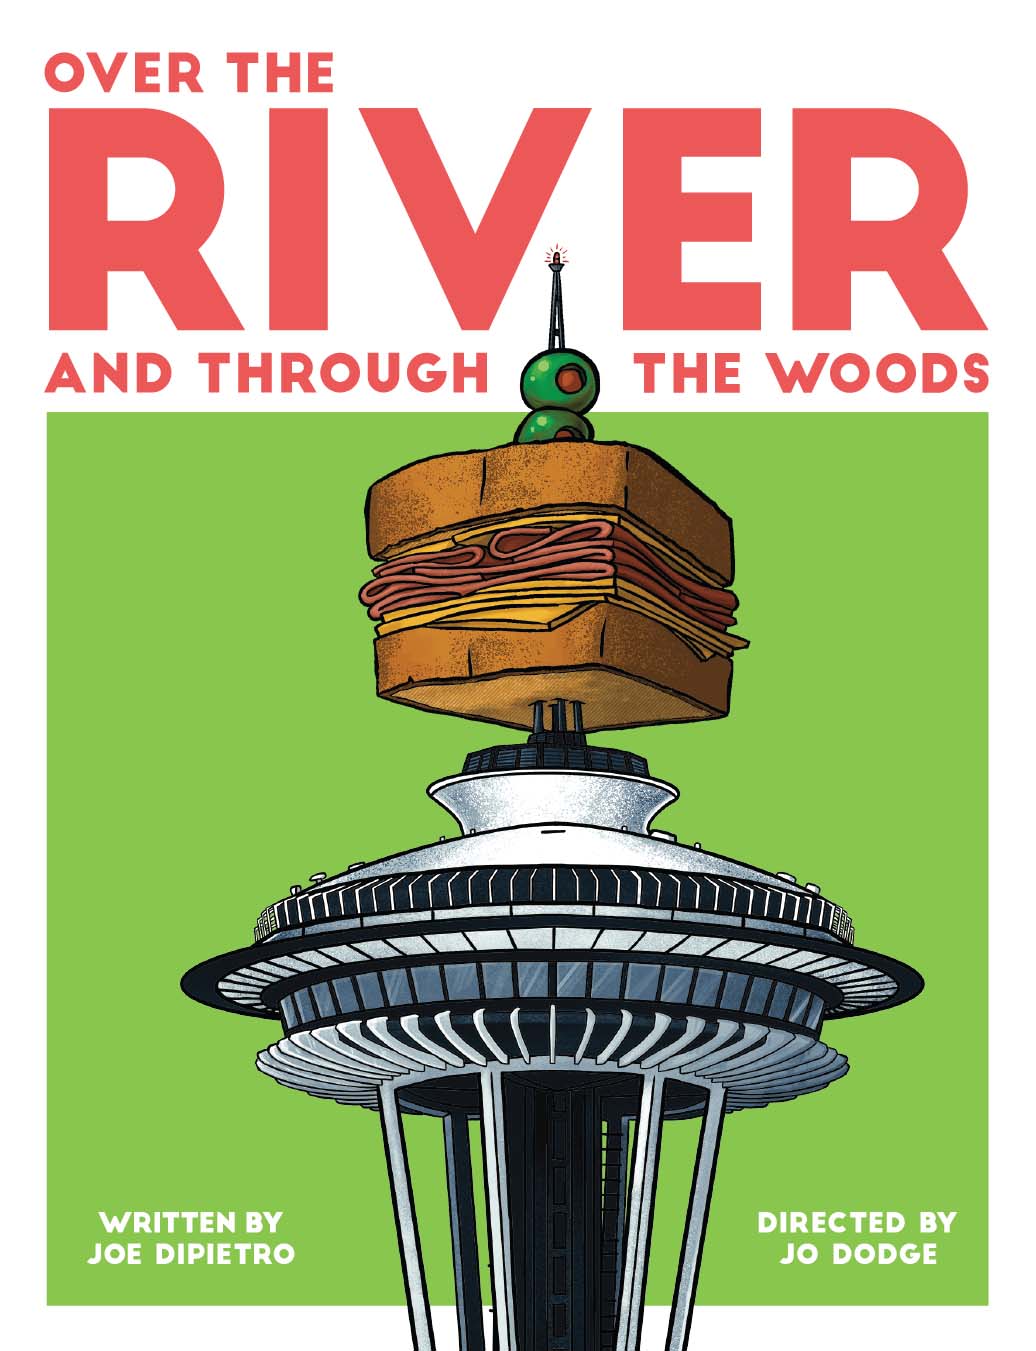 Modern comedy Over the River and Through the Woods runs Feb. 4-26